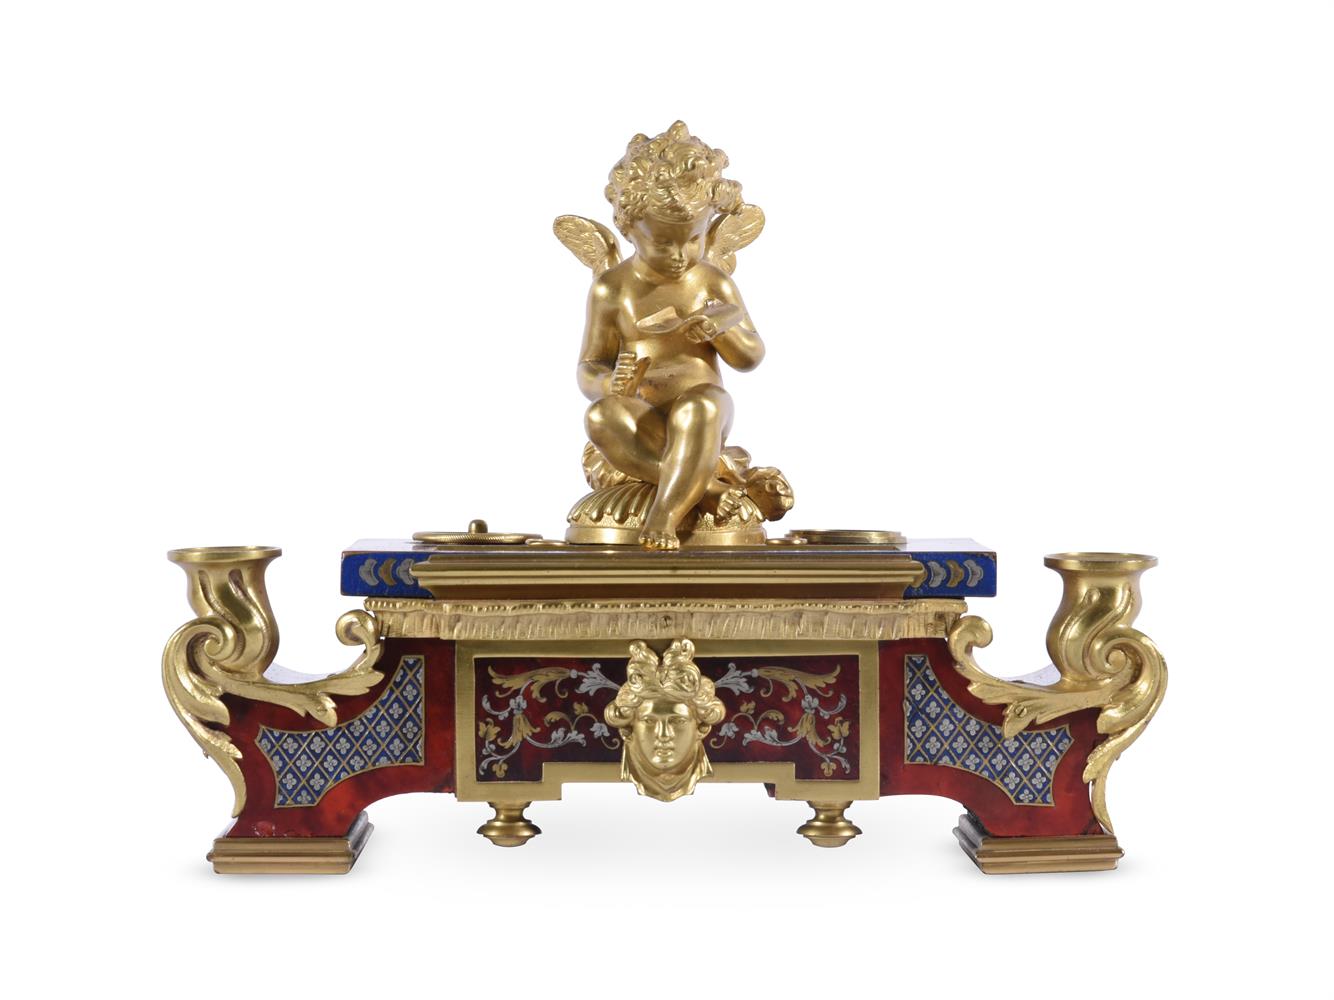 Y A FRENCH FAUX TORTOISHELL AND GILT METAL MOUNTED INK STAND IN BOULLE STYLE LATE 19TH CENTURY - Image 2 of 4